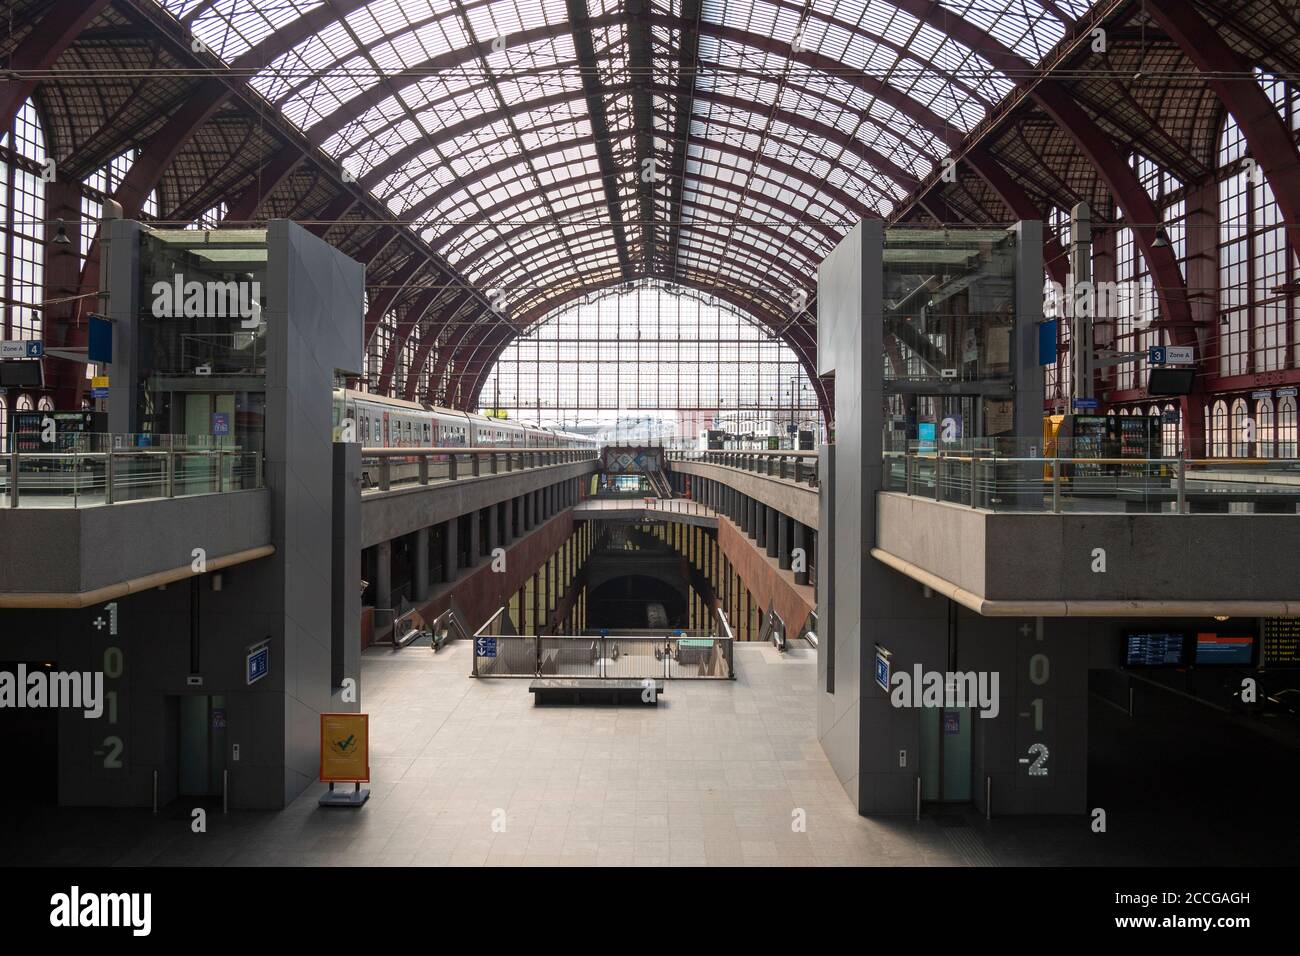 Antwerp, Belgium, August 16, 2020, Overview of the platform and lifts in the central station Stock Photo